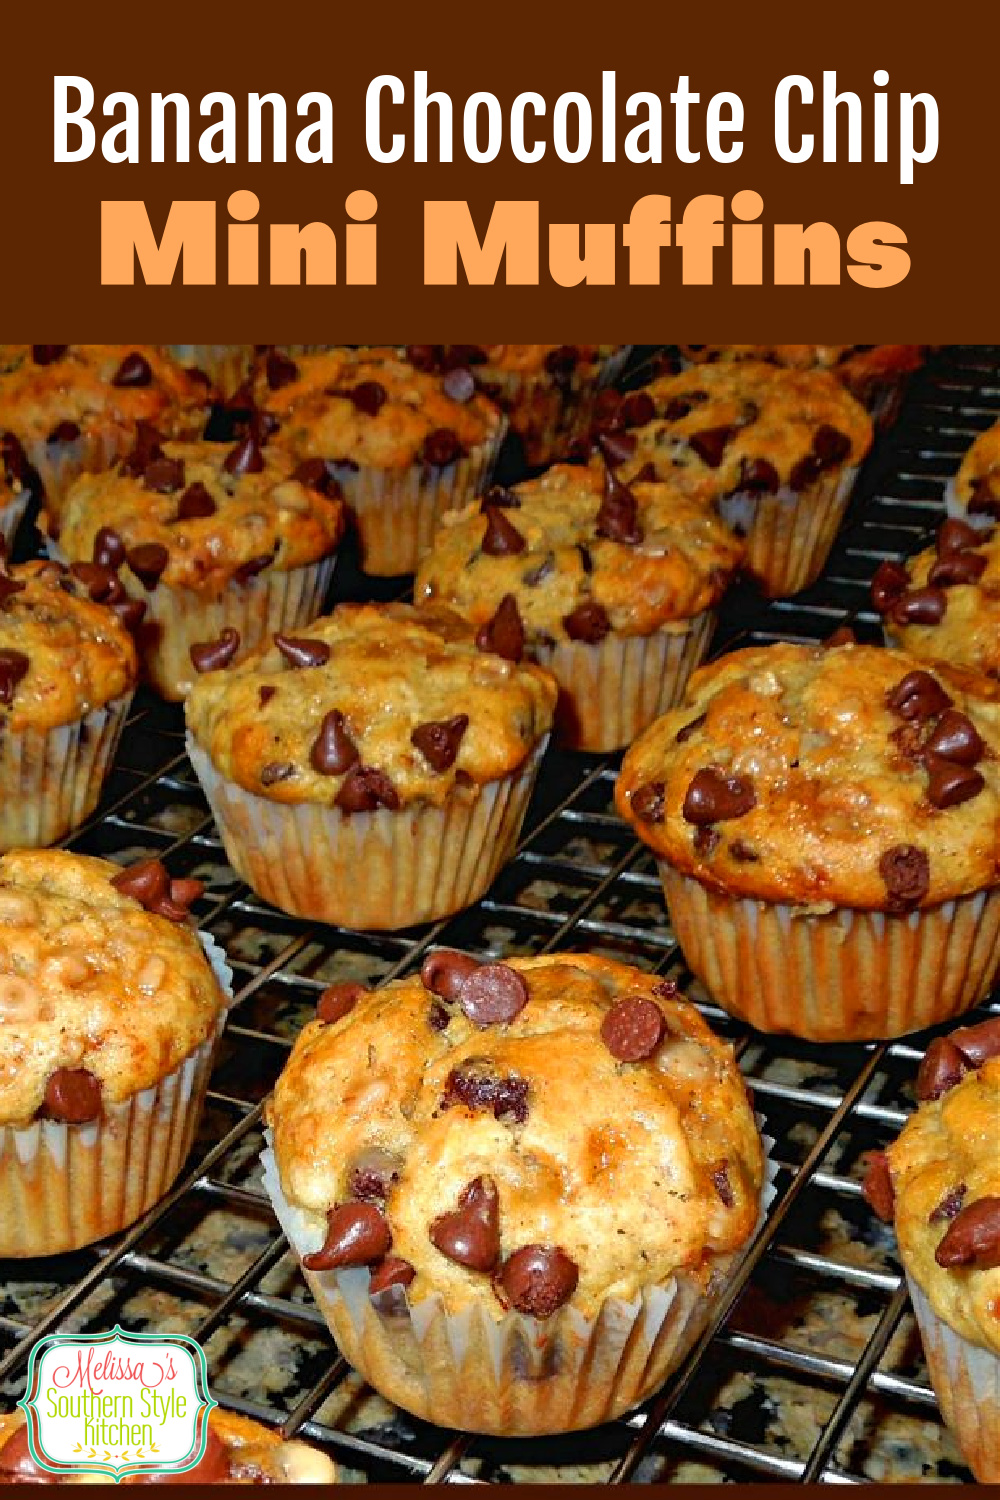 These Banana Chocolate Chip Mini Muffins are ideal for breakfast, brunch or a mid morning snack #bananamuffins #muffins #chocolatechips #chocolatechipbanana #desserts #brunch #breakfast #sweets #holidaybrunch #holidaybaking #minimuffins #southernrecipes #southernfood #melissassouthernstylekitchen